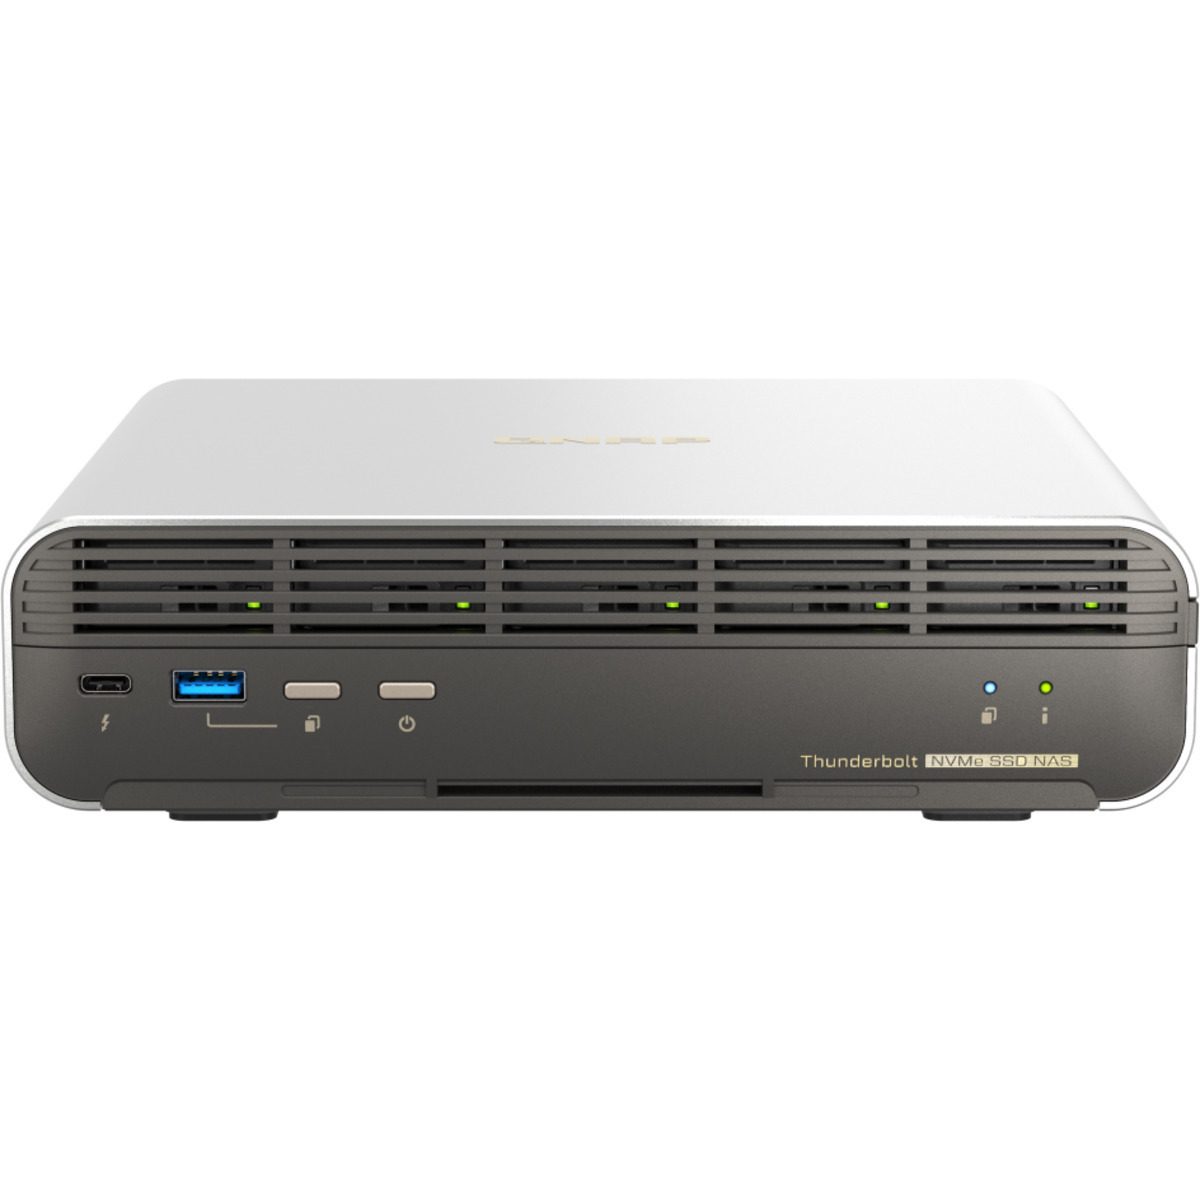 QNAP TBS-h574TX Core i3 Thunderbolt 4 4tb 5-Bay Desktop Multimedia / Power User / Business DAS-NAS - Combo Direct + Network Storage Device 4x1tb Samsung 990 PRO MZ-V9P1T0BW  7450/6900MB/s M.2 2280 NVMe SSD ENTERPRISE Class Drives Installed - Burn-In Tested TBS-h574TX Core i3 Thunderbolt 4